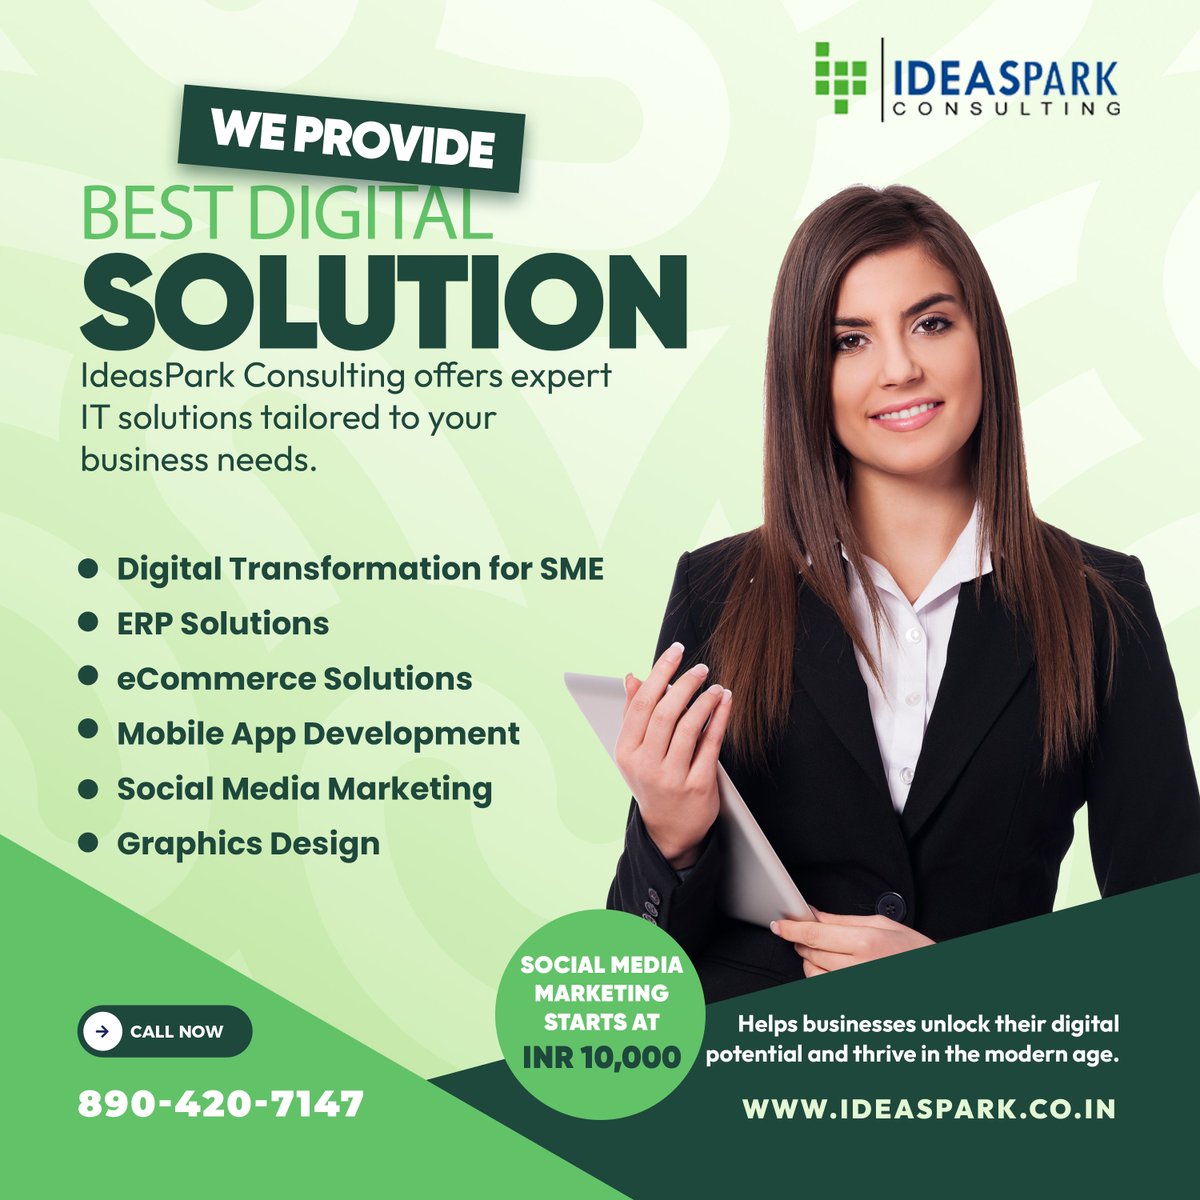 🚀Unlock your business potential with IdeasPark Consulting!📈 
🌐 𝘄𝘄𝘄.𝗶𝗱𝗲𝗮𝘀𝗽𝗮𝗿𝗸.𝗰𝗼.𝗶𝗻
#DigitalTransformation #DigitalStrategy #DigitalGrowth #FutureProofYourBusiness #DigitalRevolution #DigitalTransformationExpert #FutureofWork #Innovation #TechConsulting